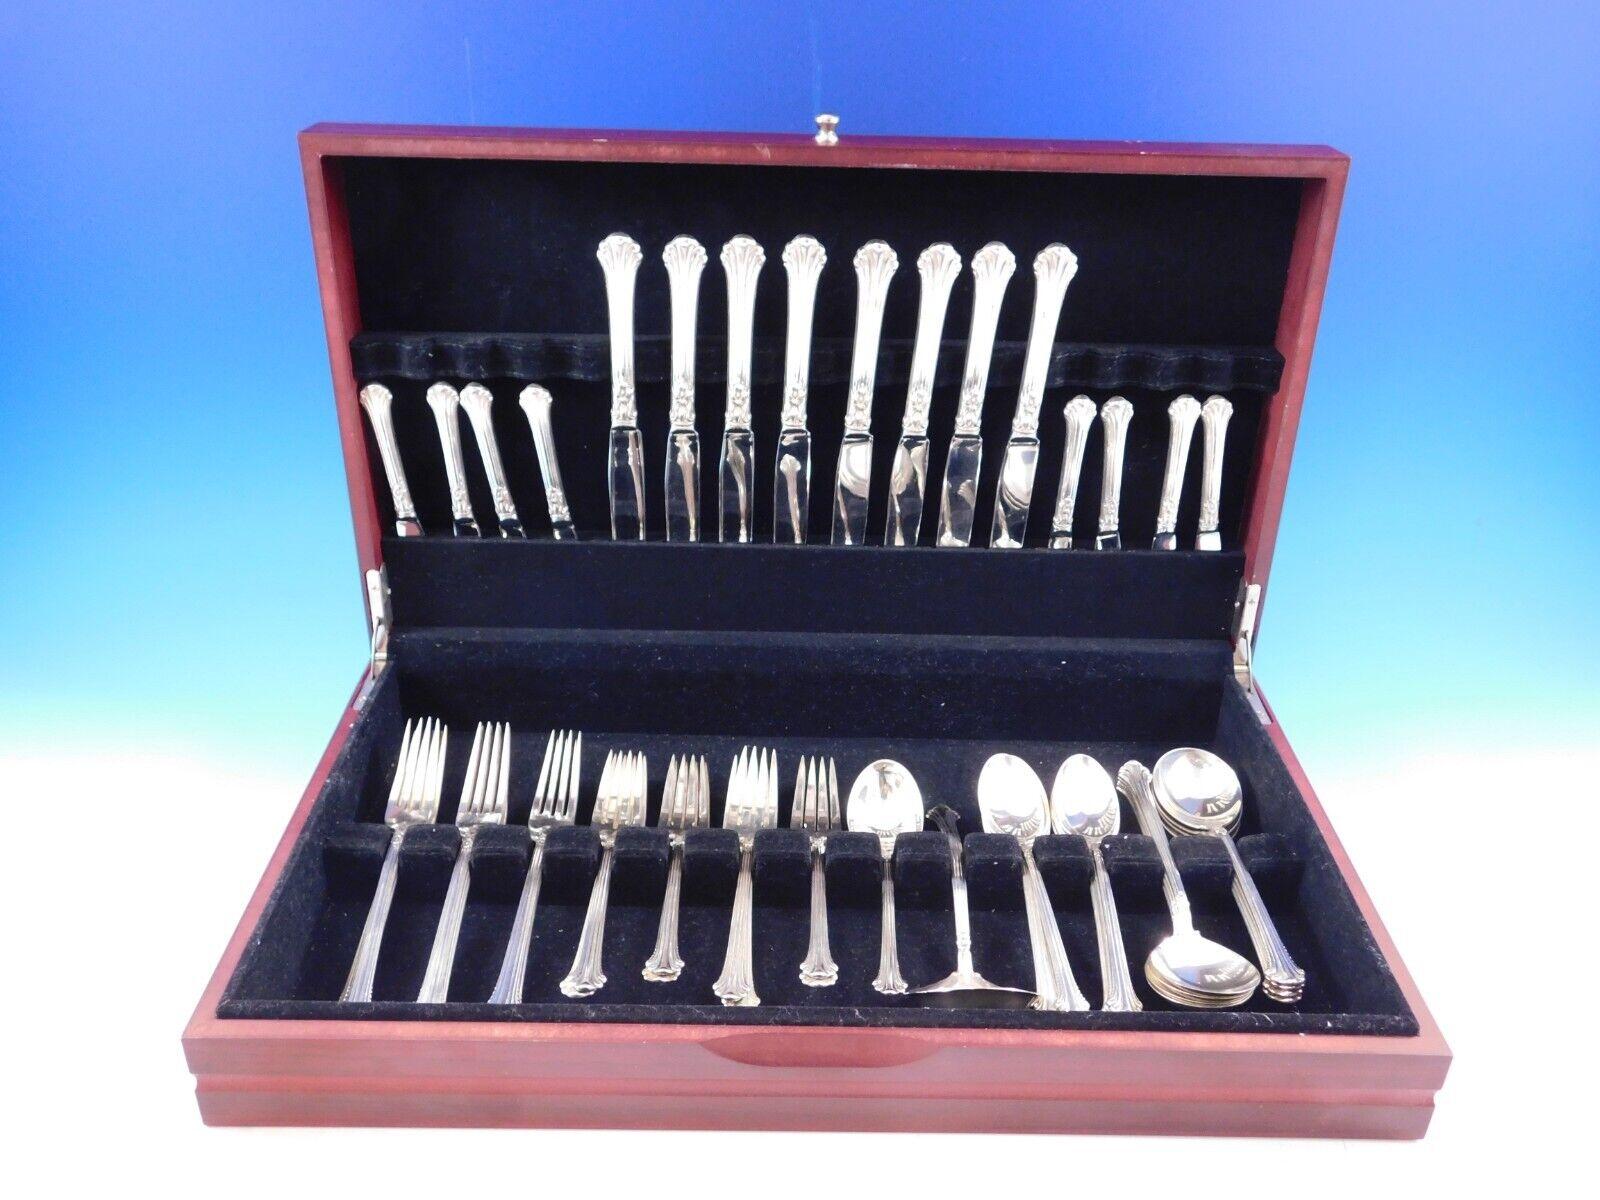 Lovely Silver Plumes by Towle sterling silver flatware set, 50 pieces. This set includes:

8 Knives, 8 3/4